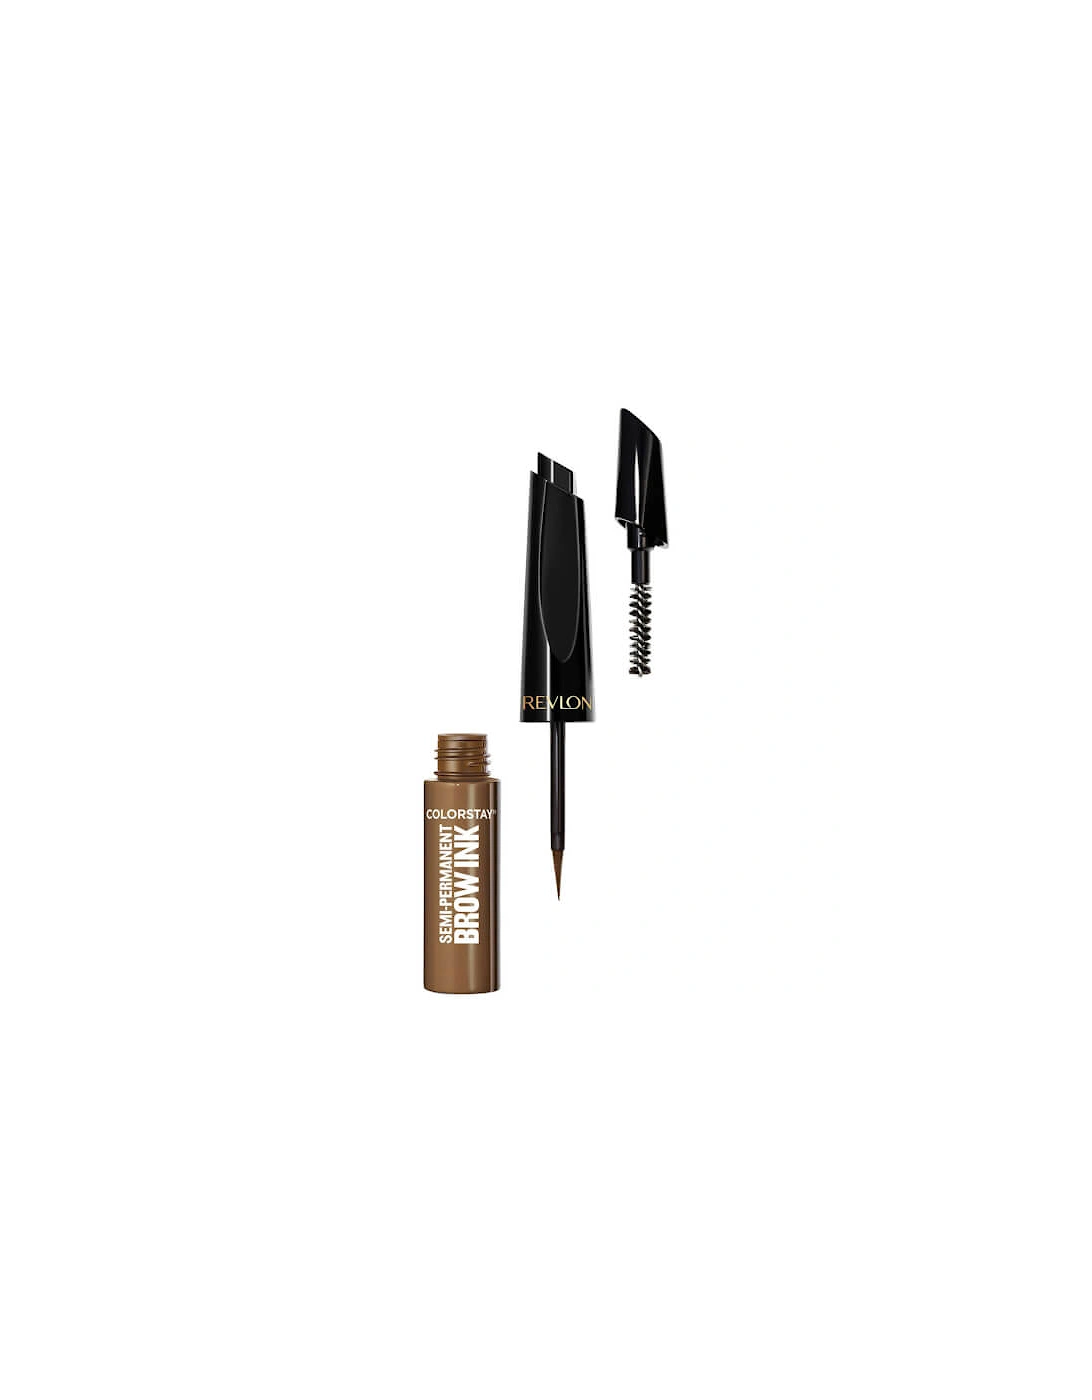 ColorStay Semi-Permanent Brow Ink - Soft Brown, 2 of 1